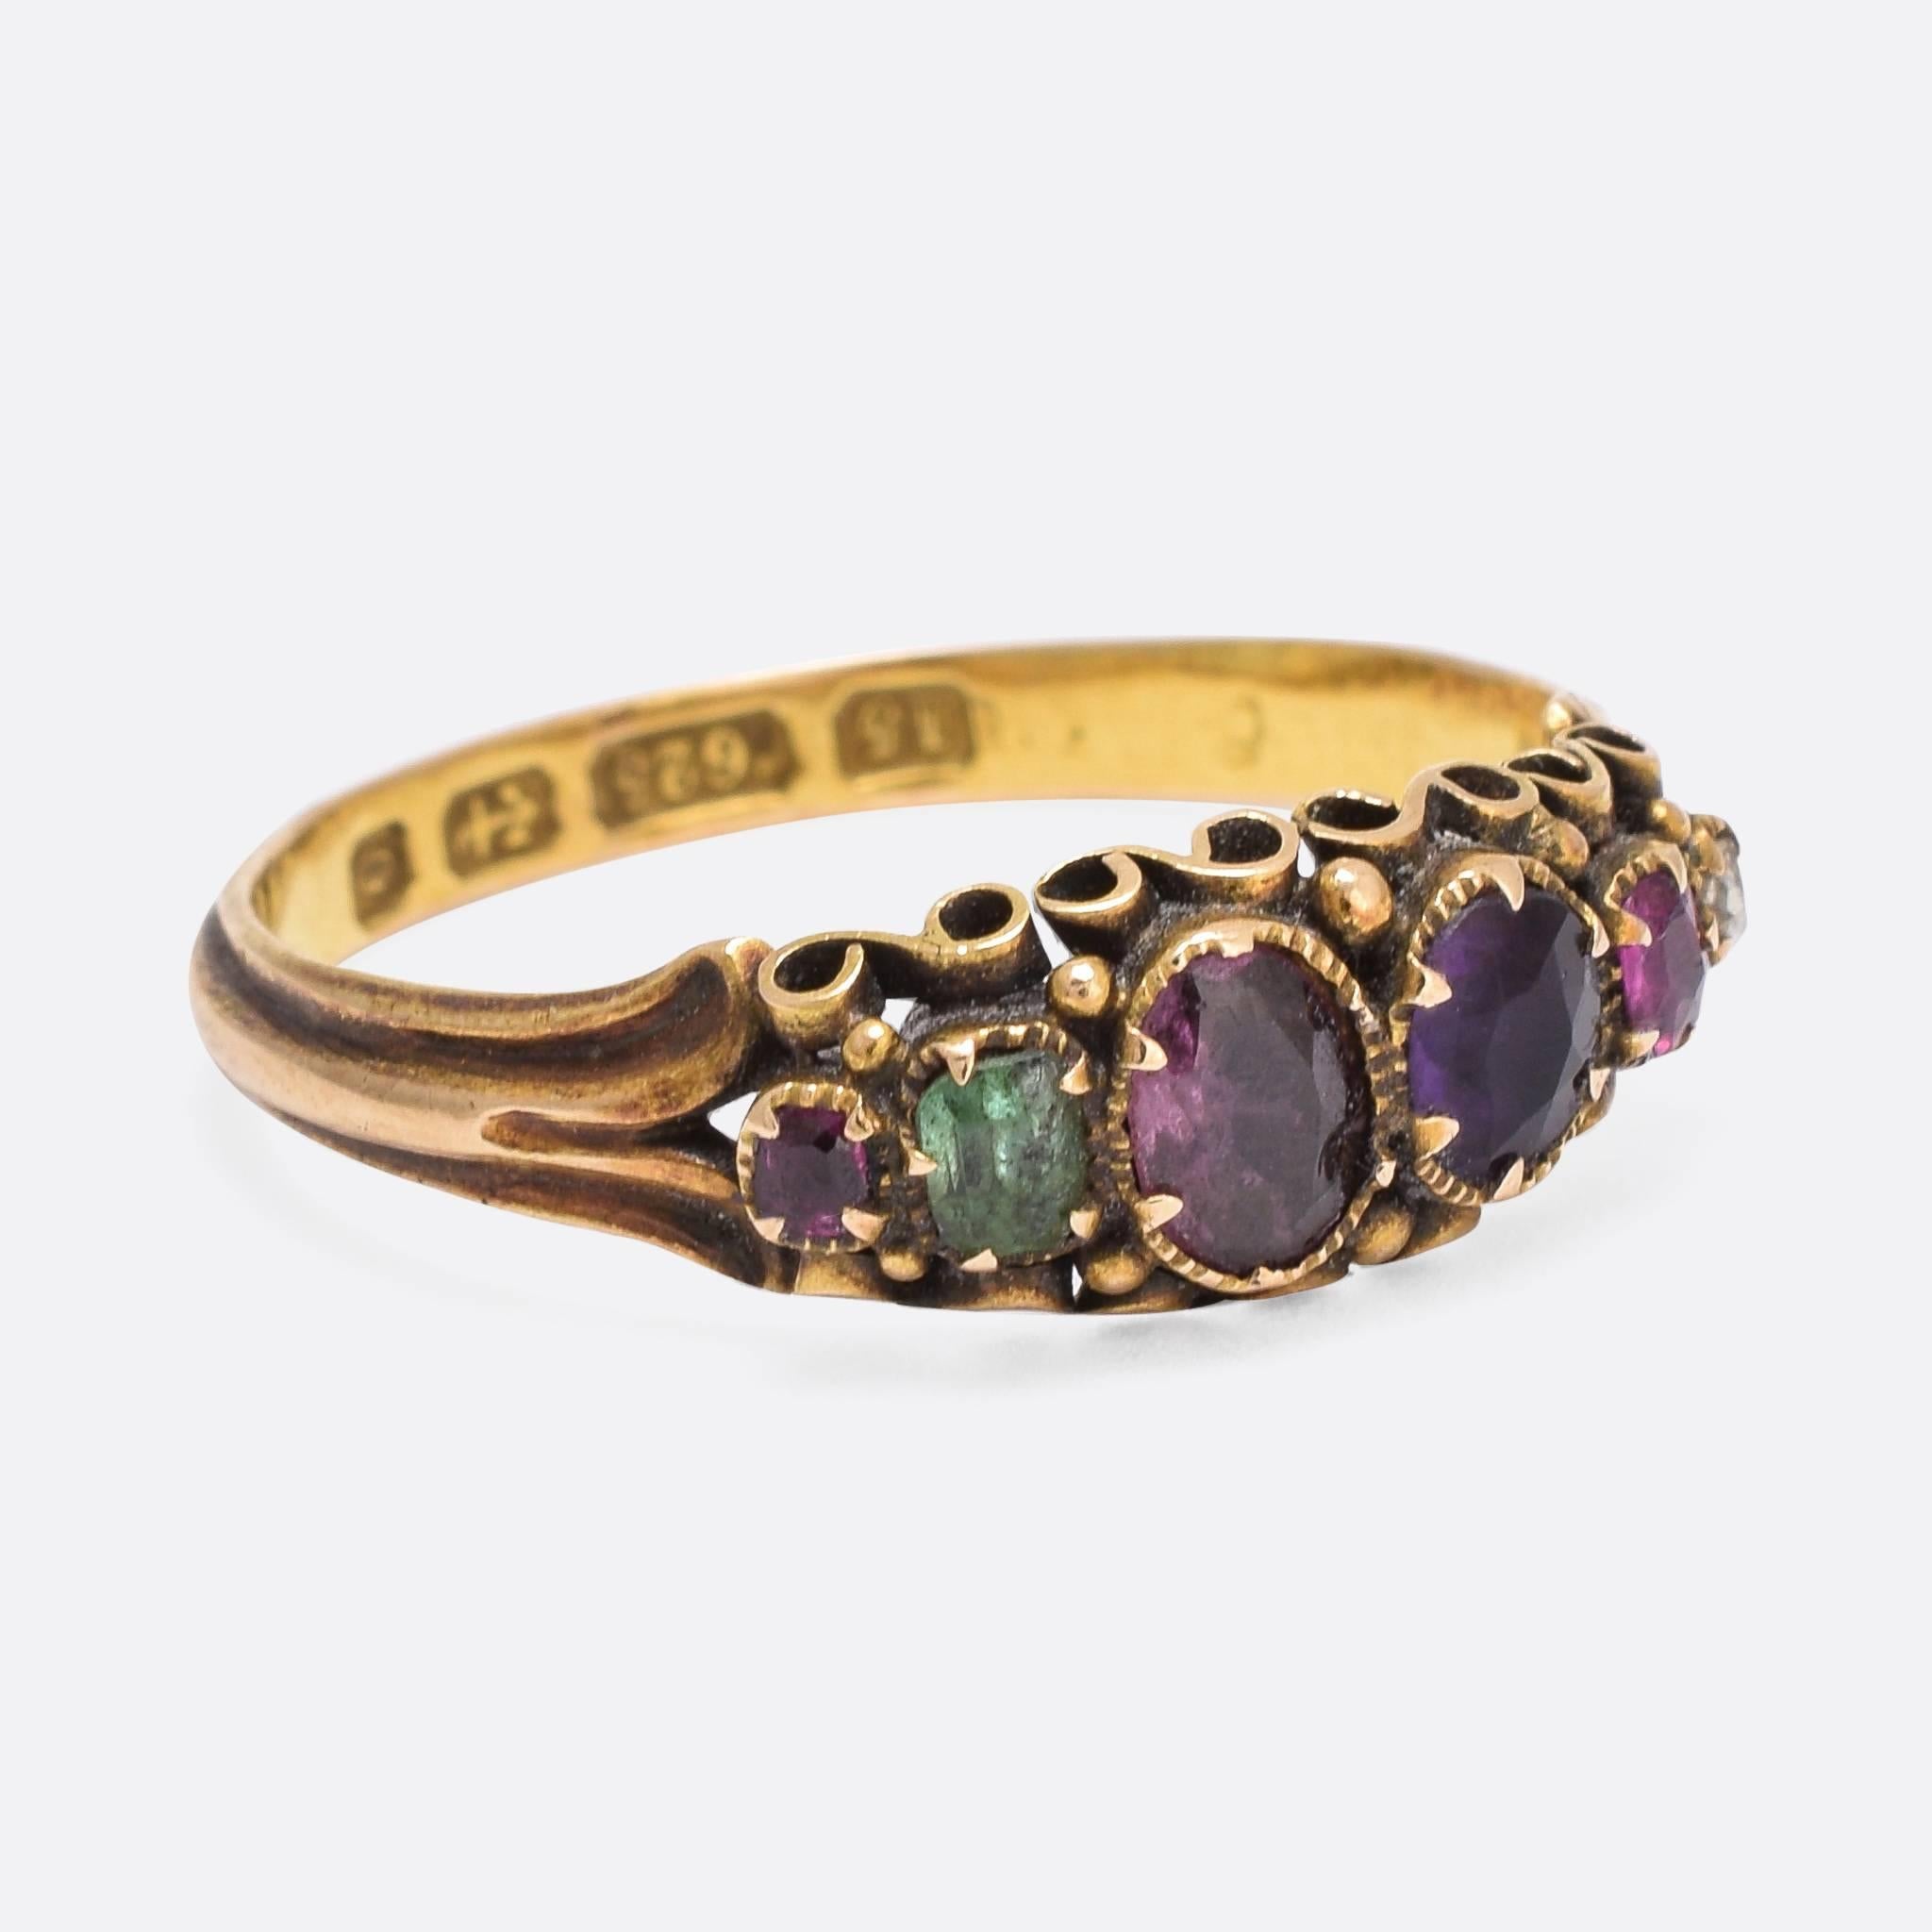 This wonderful Victorian acrostic ring is modelled in 15ct rose gold, with clear hallmarks for the year 1863. All original, first letter of each gemstone spells out the romantic sentiment "REGARD": ruby emerald garnet amethyst ruby